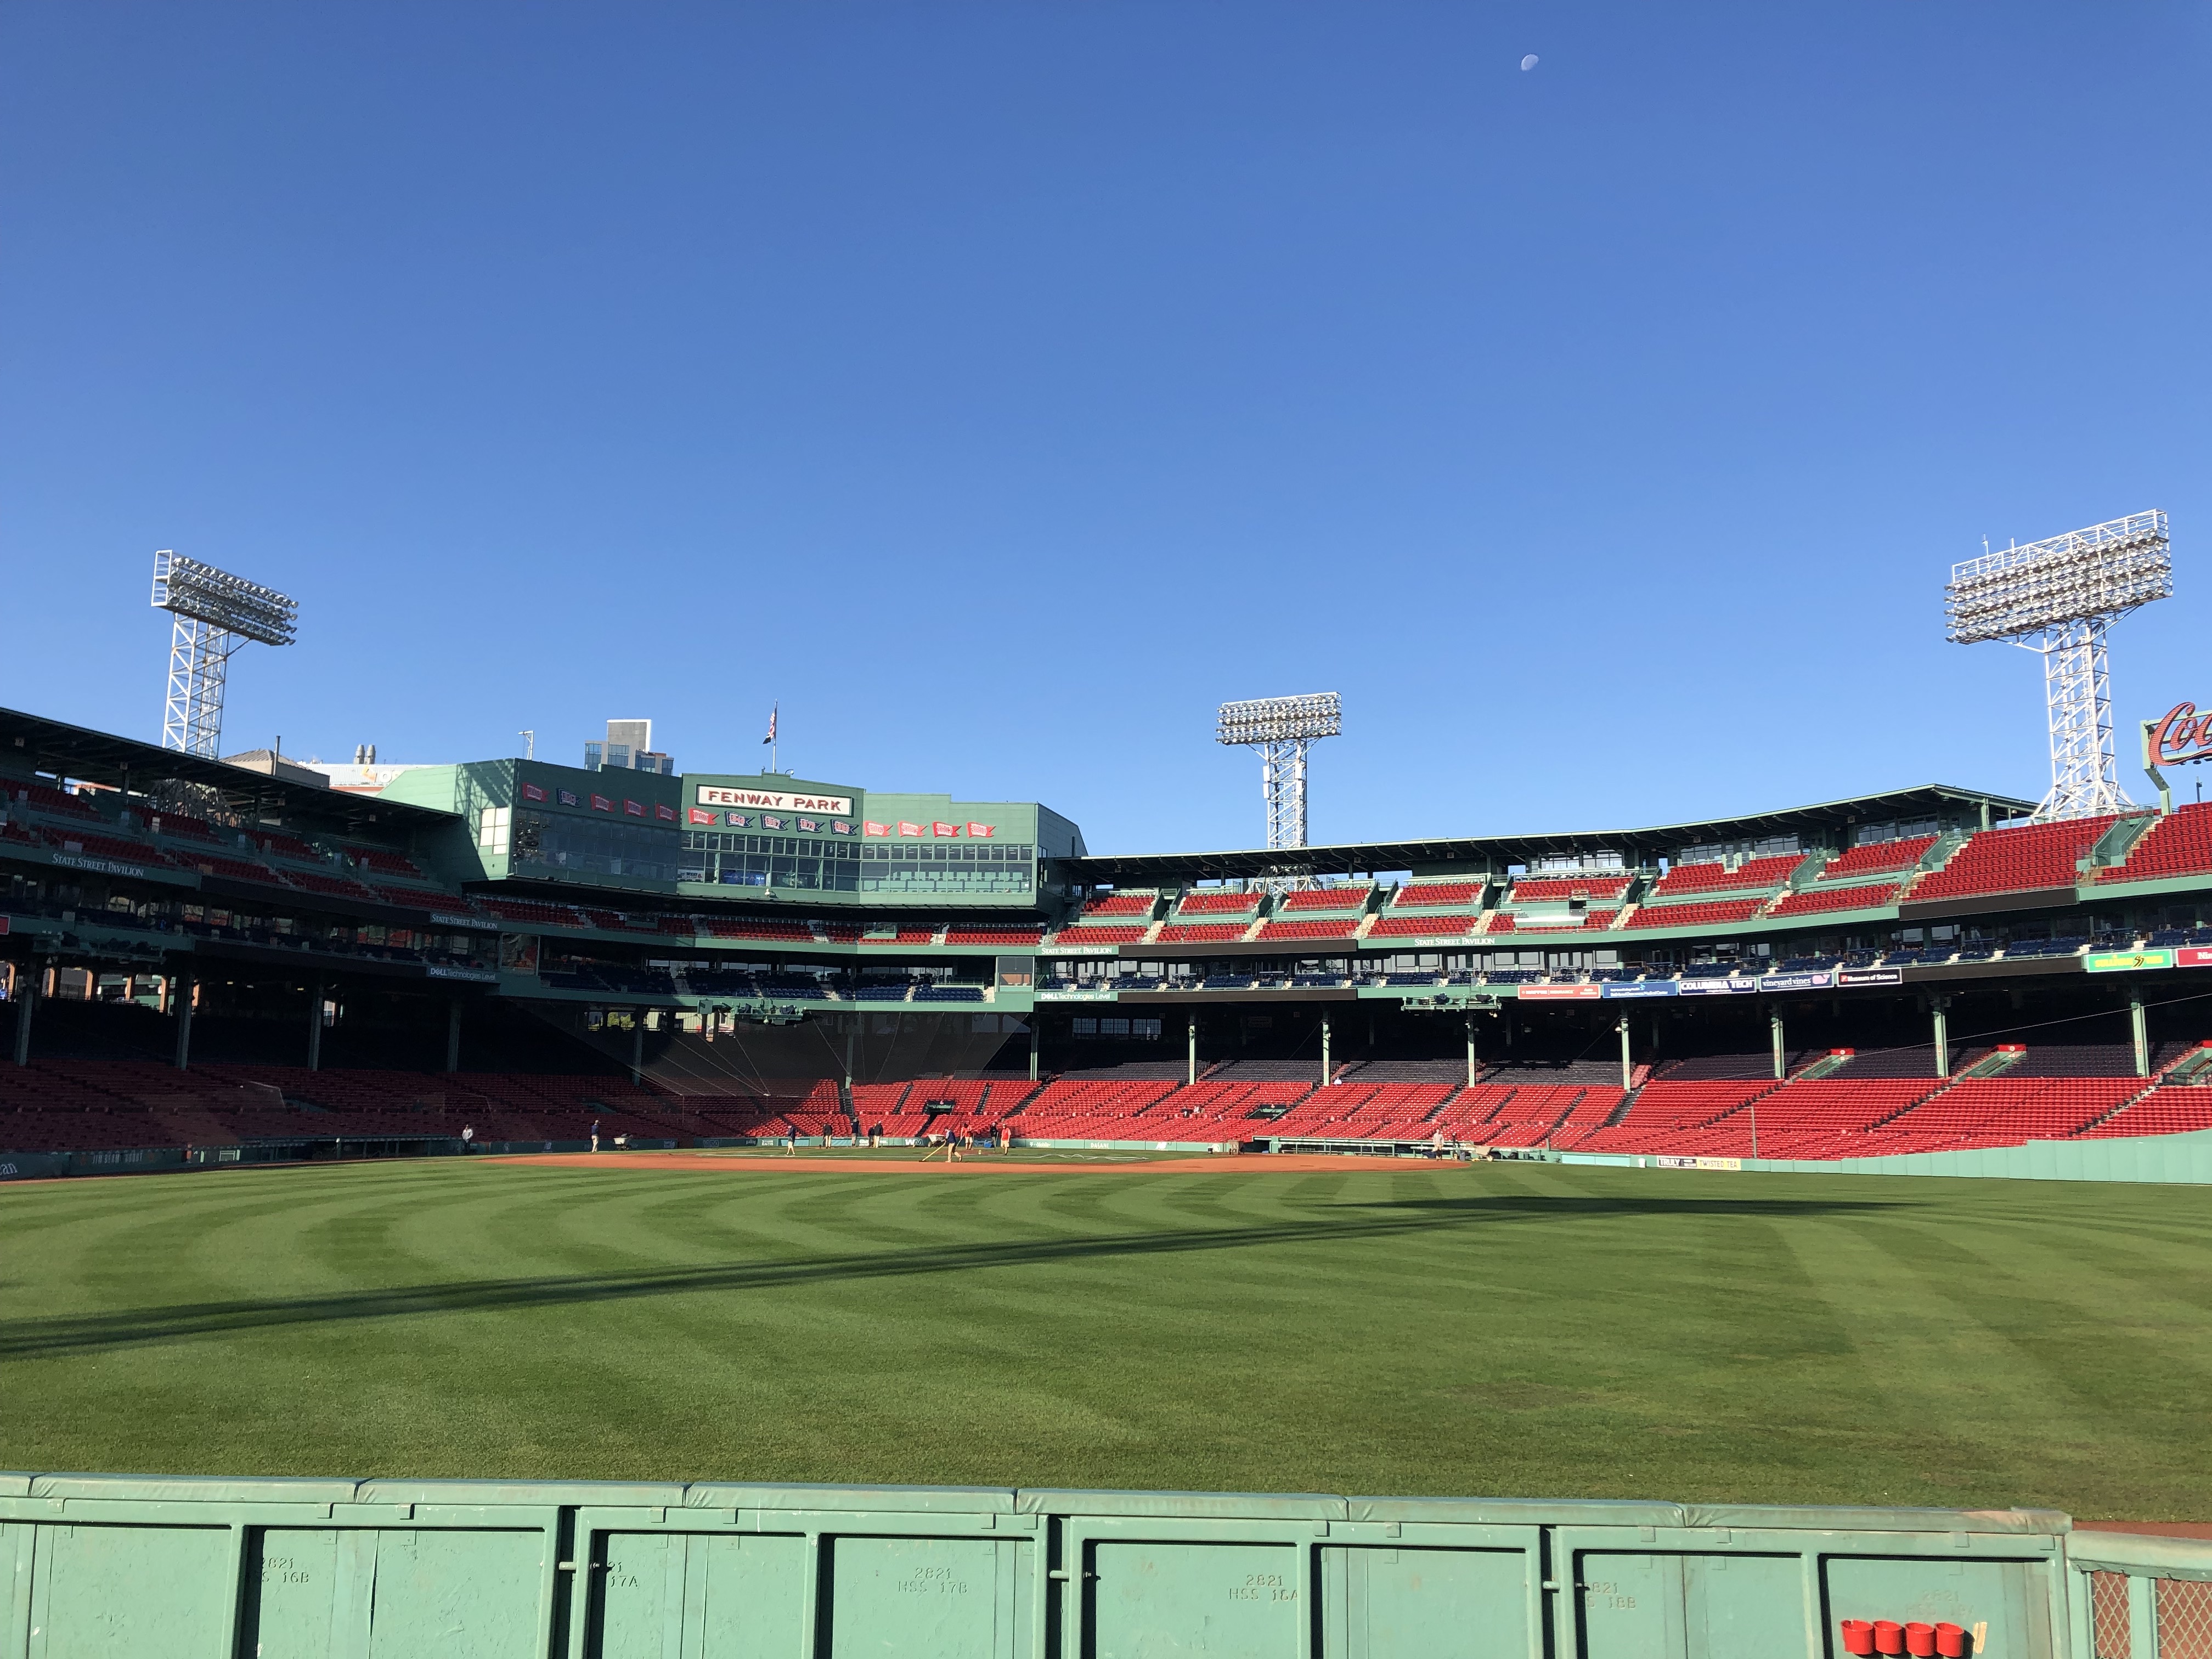 The Moon is visible over Fenway Park's baseball field in this cell phone image.